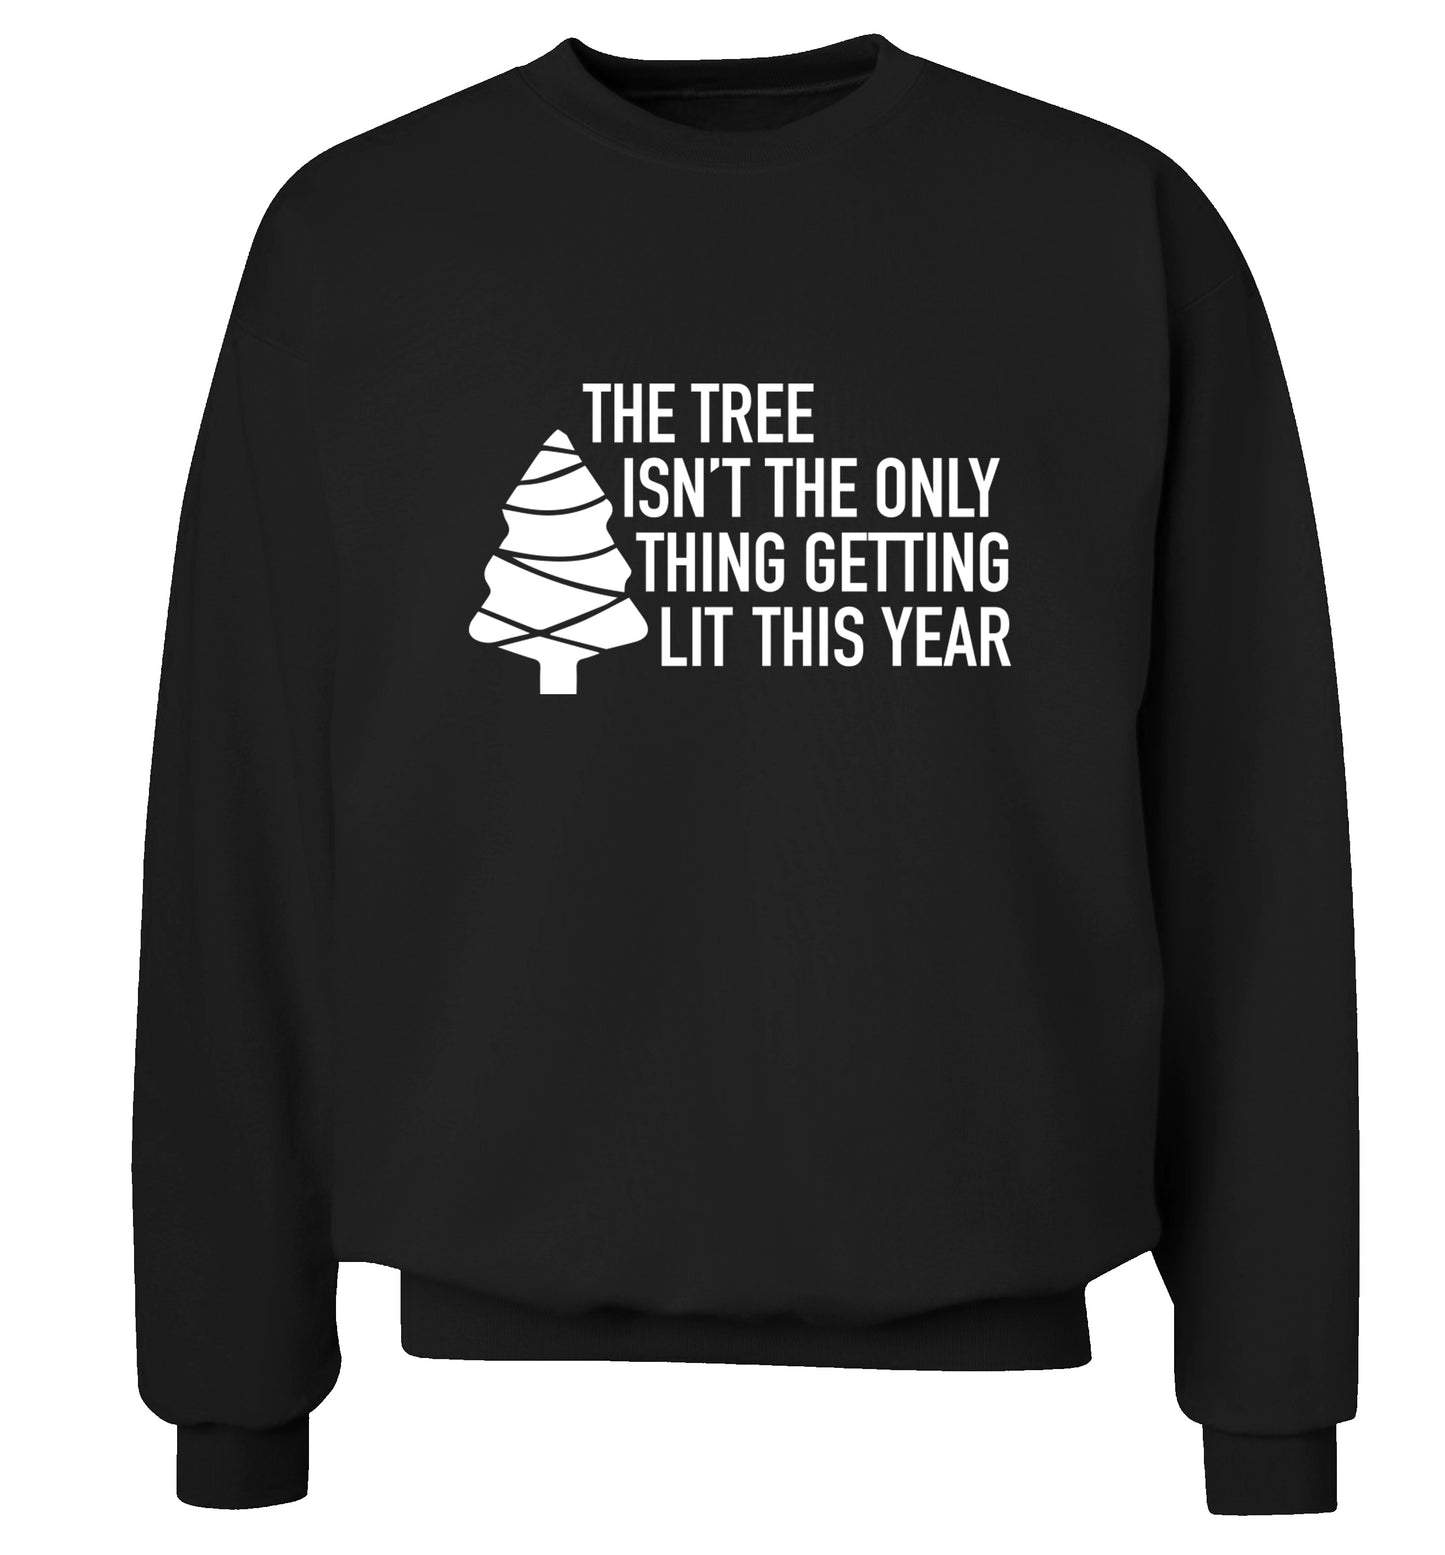 The tree isn't the only thing getting lit this year Adult's unisex black Sweater 2XL